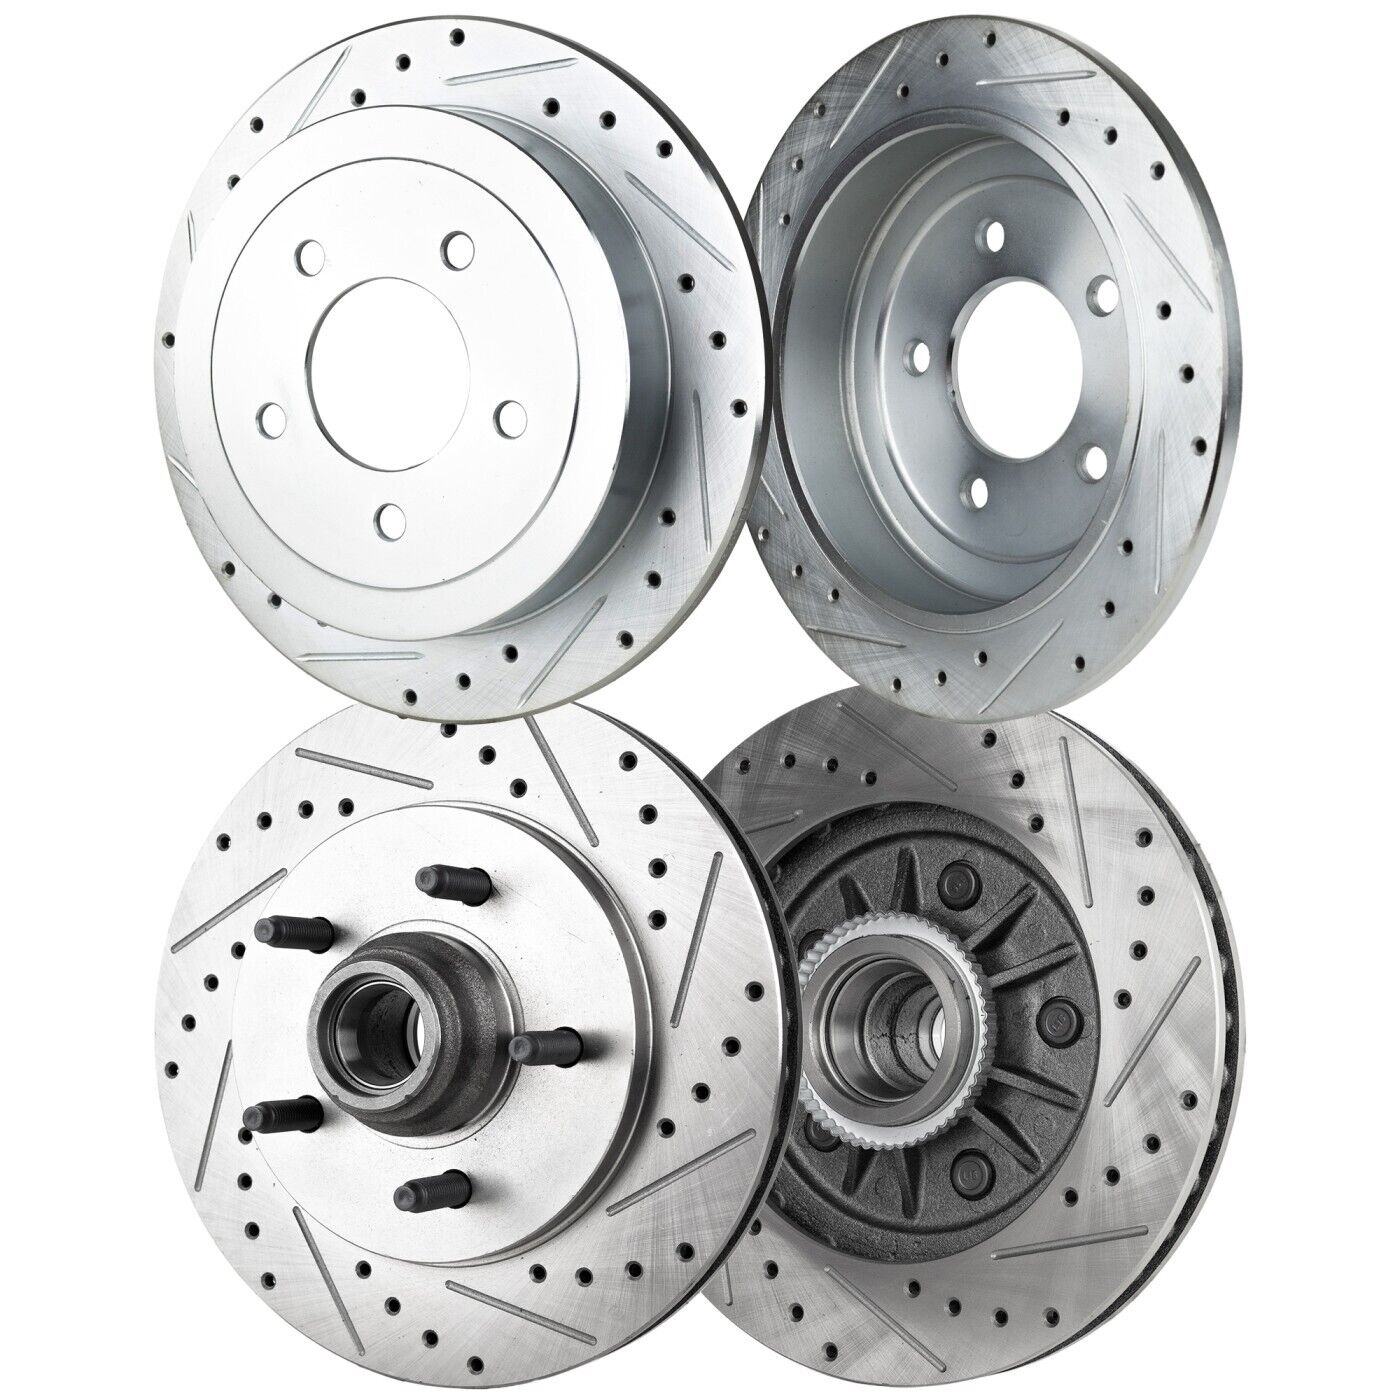 Front & Rear Brake Disc Rotors for F150 Truck Ford F-150 Expedition Navigator